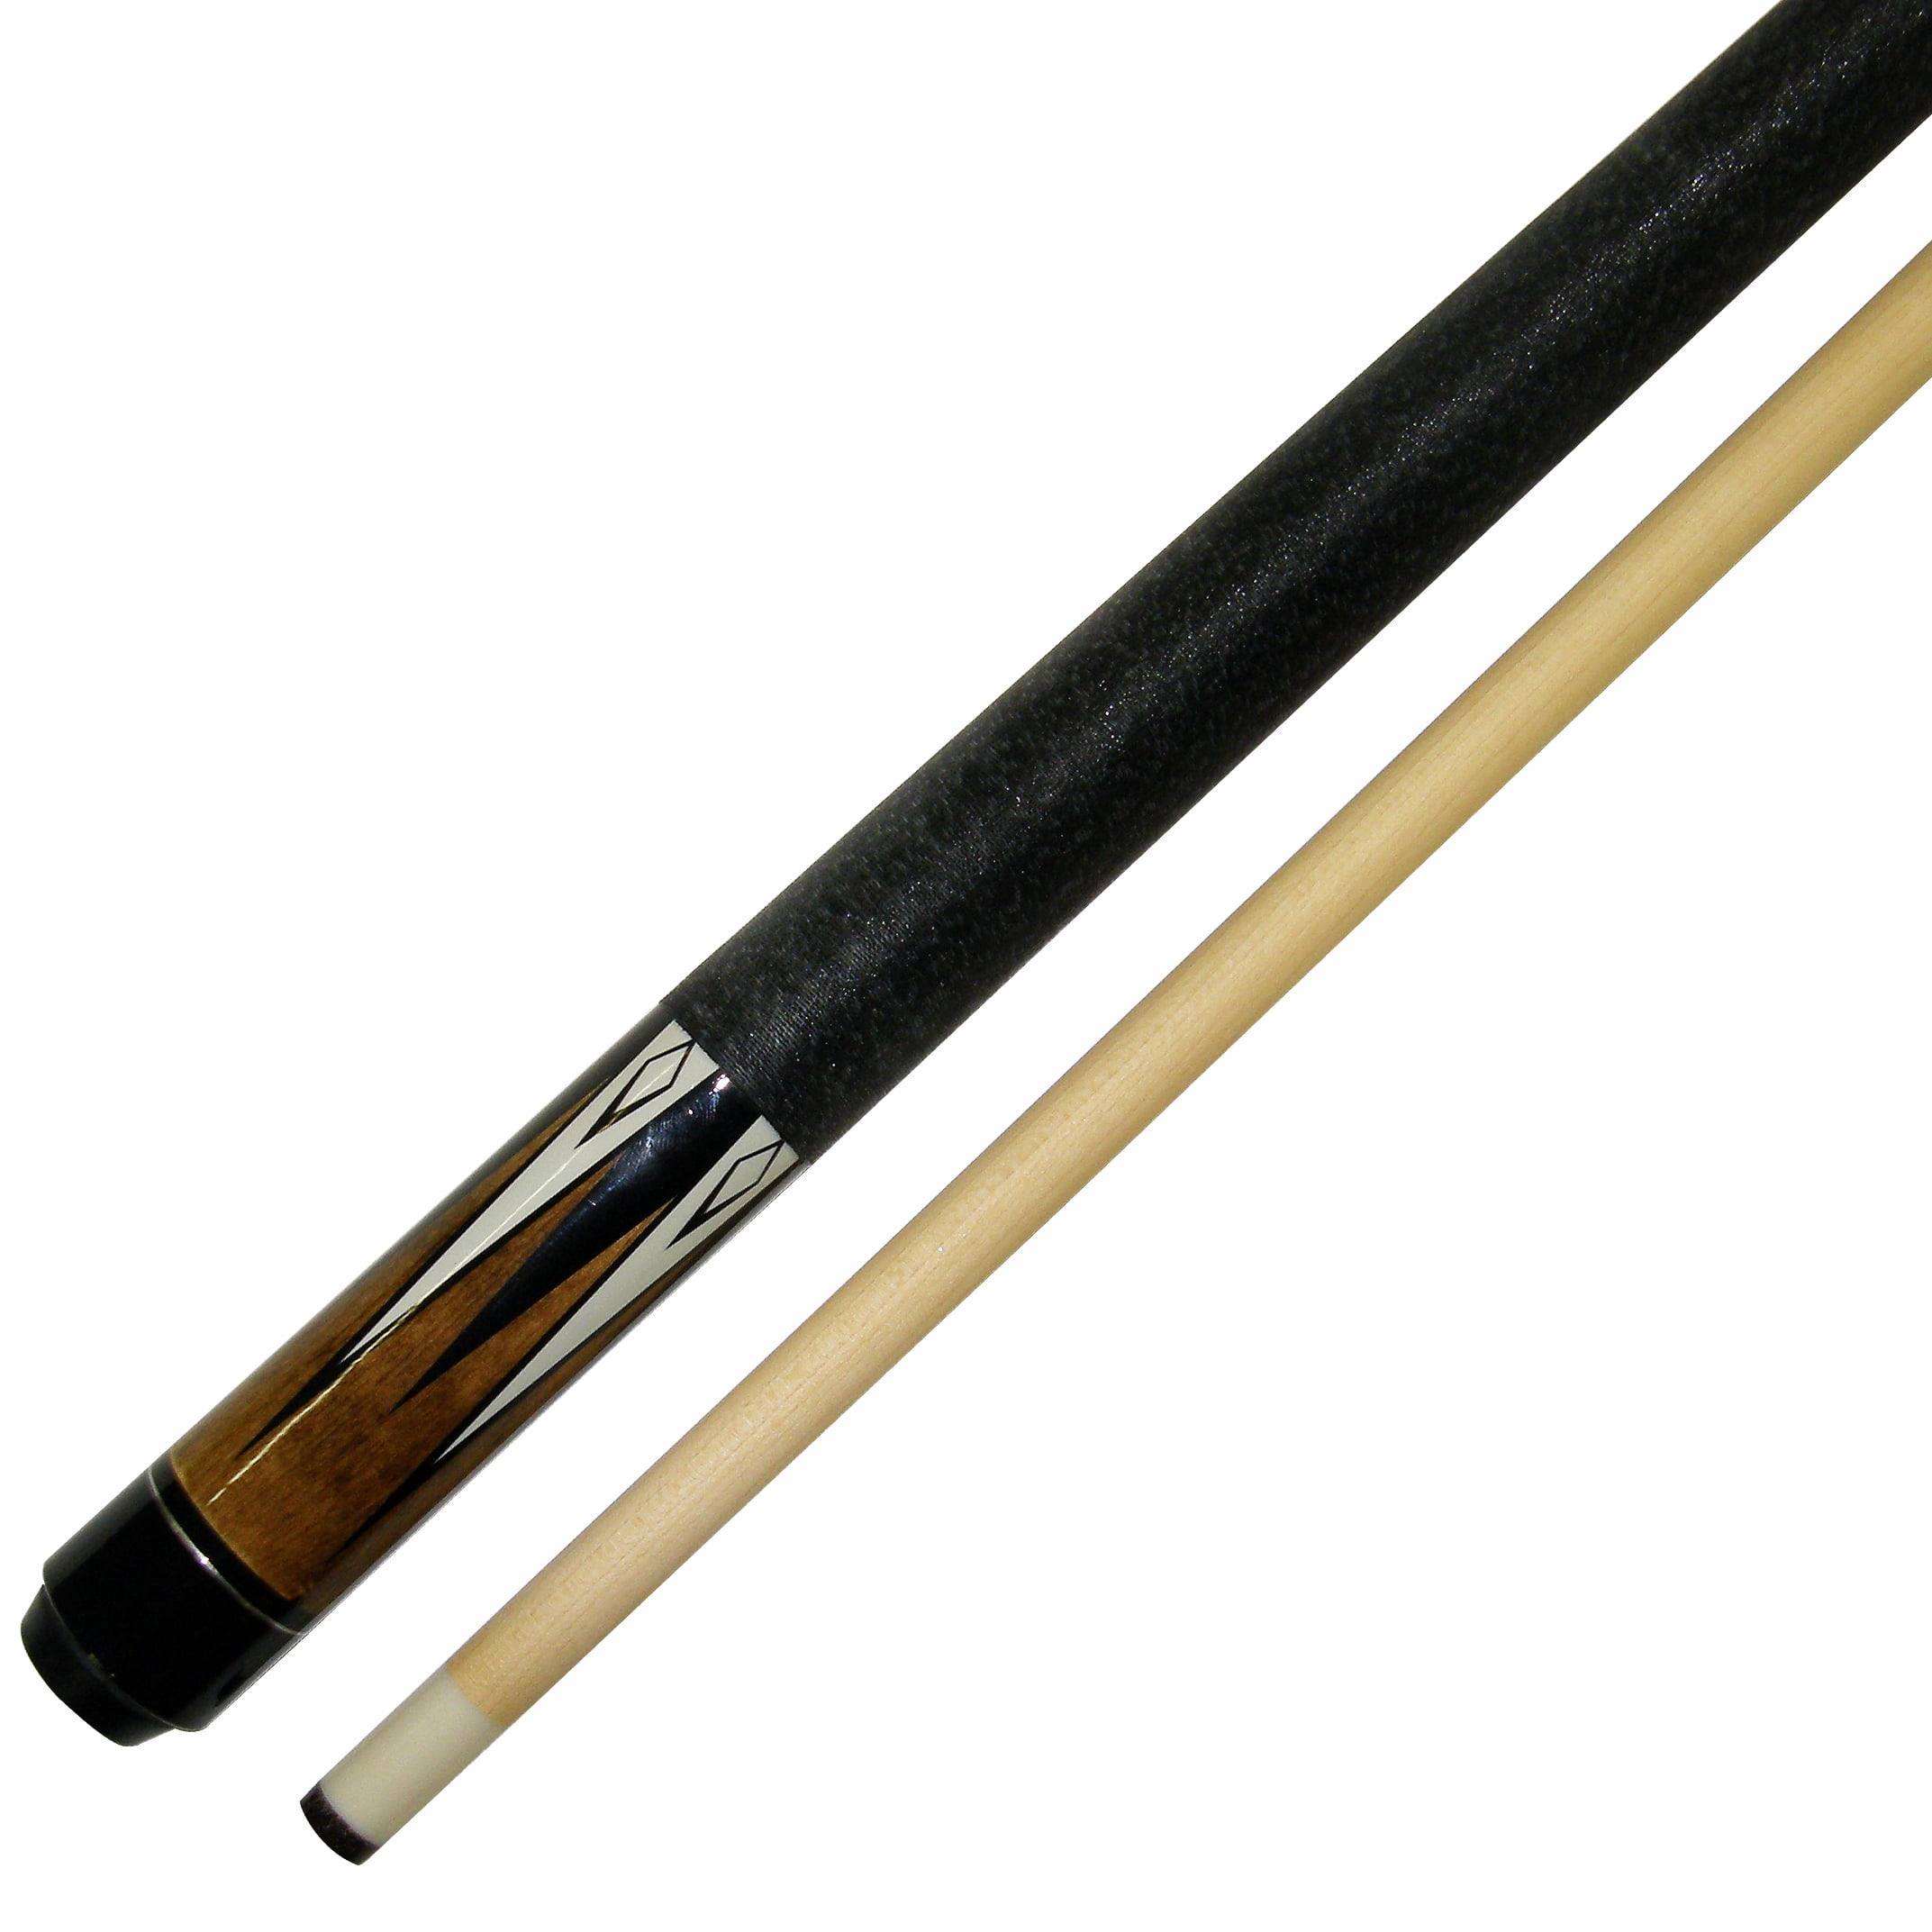 Python 2 Professional Billiard Pool Cue Stick with Hard Case And Joint Protectors Pieces Pool Cue Stick 100/% Canadian Maple Wood